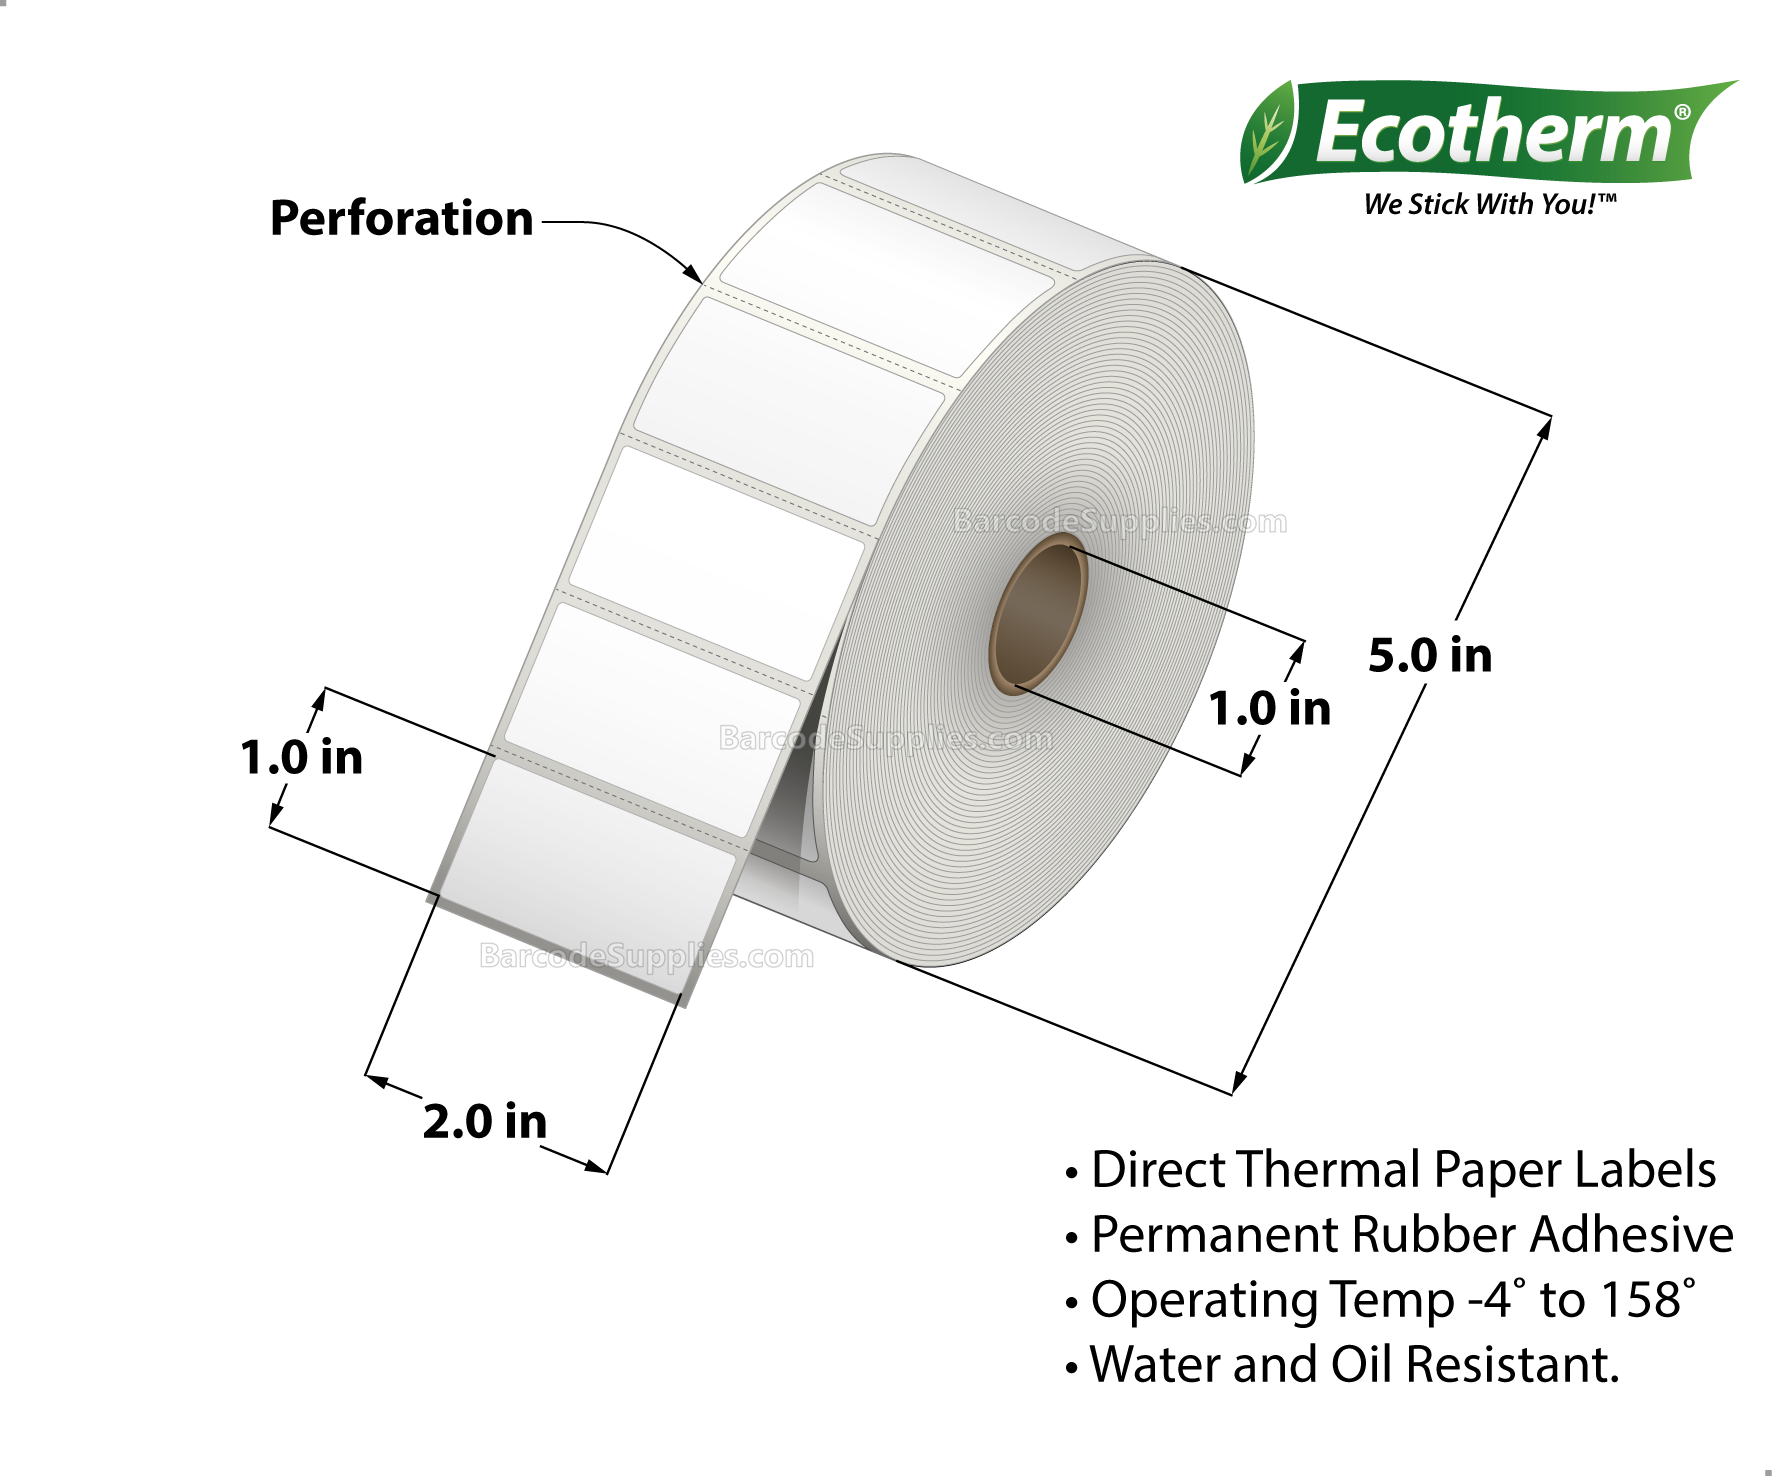 2 x 1 Direct Thermal White Labels With Rubber Adhesive - Perforated - 2500 Labels Per Roll - Carton Of 6 Rolls - 15000 Labels Total - MPN: ECOTHERM15118-6